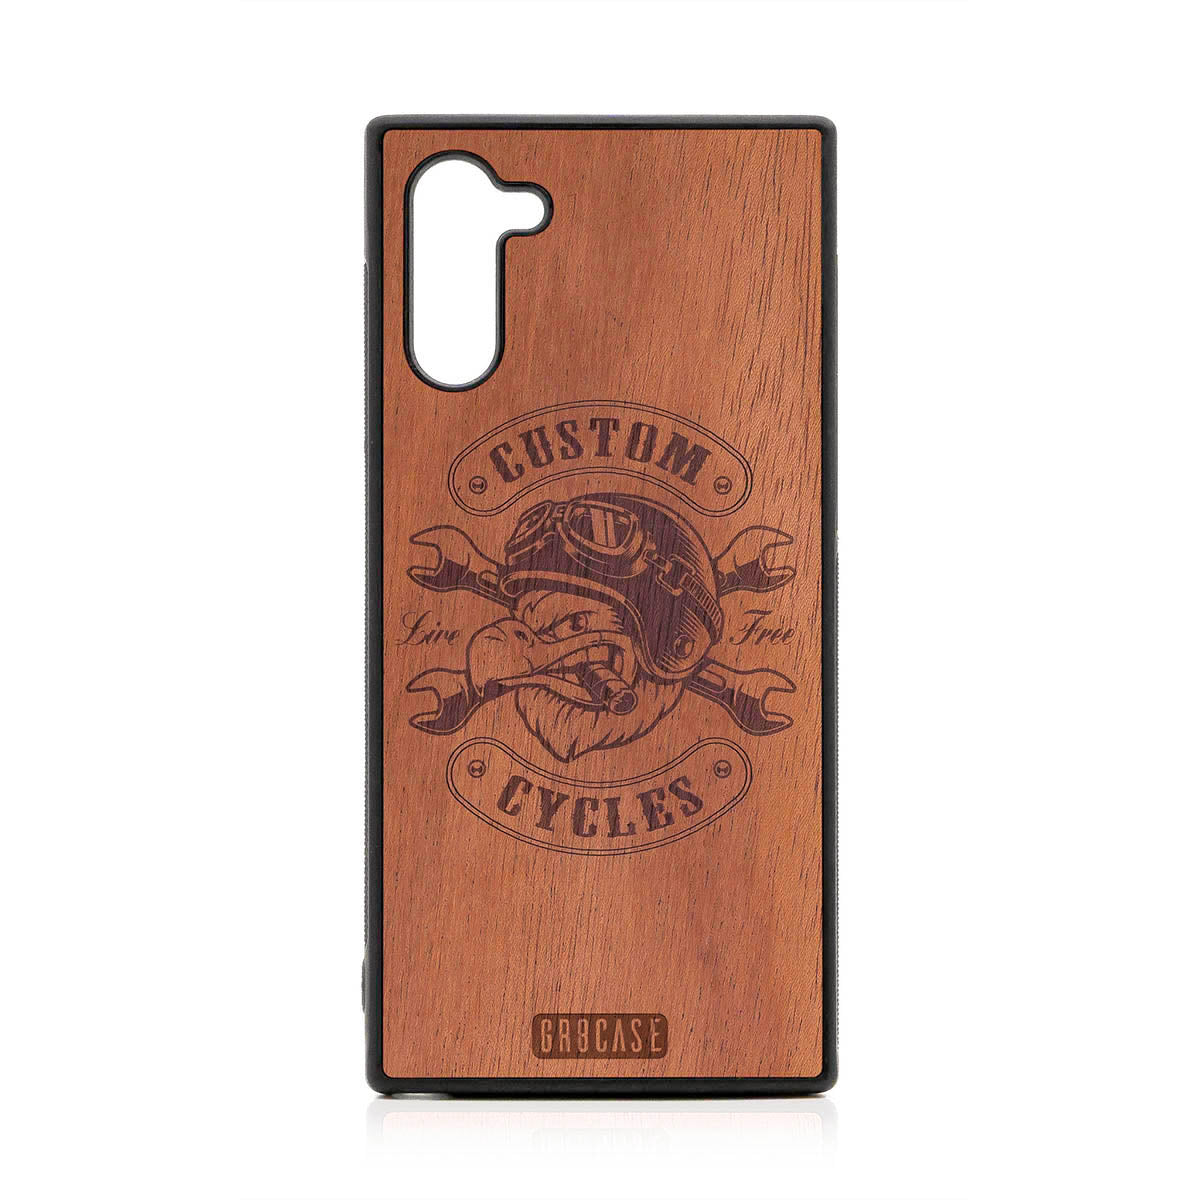 Custom Cycles Live Free (Biker Eagle) Design Wood Case For Samsung Galaxy Note 10 by GR8CASE